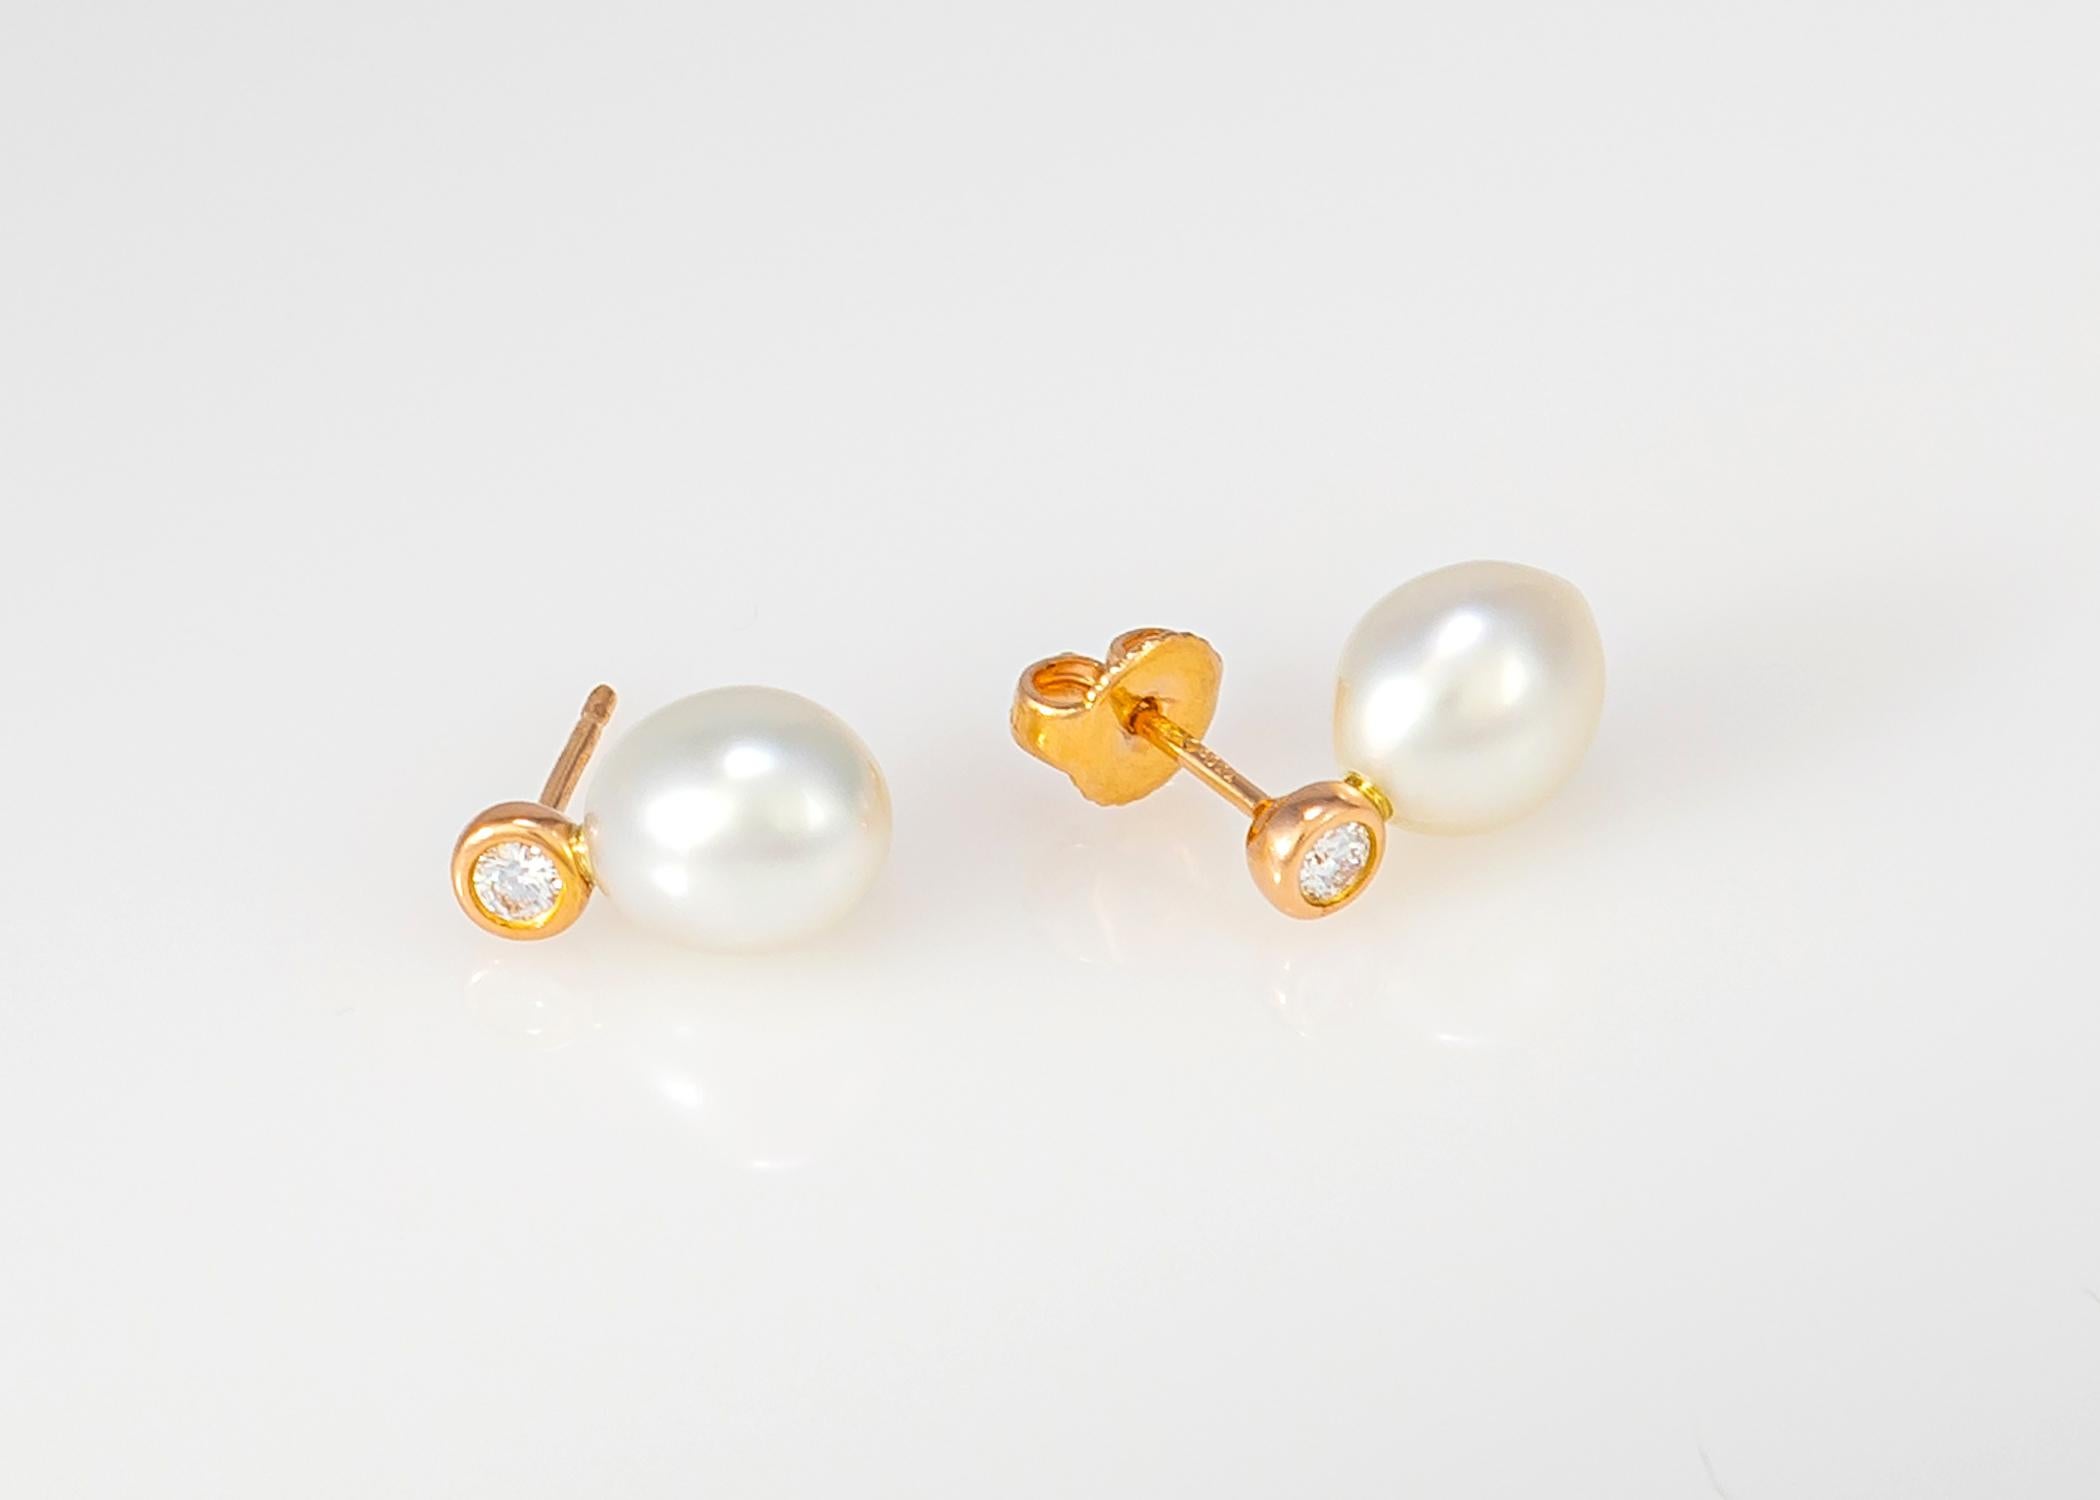 Elsa Peretti designs are iconic and collectable. This pair of earrings feature brilliant cut diamonds .18 carats total weight and a pair of white keshi pearls 7.9 mm in length. Just over 1/2 inch total length.